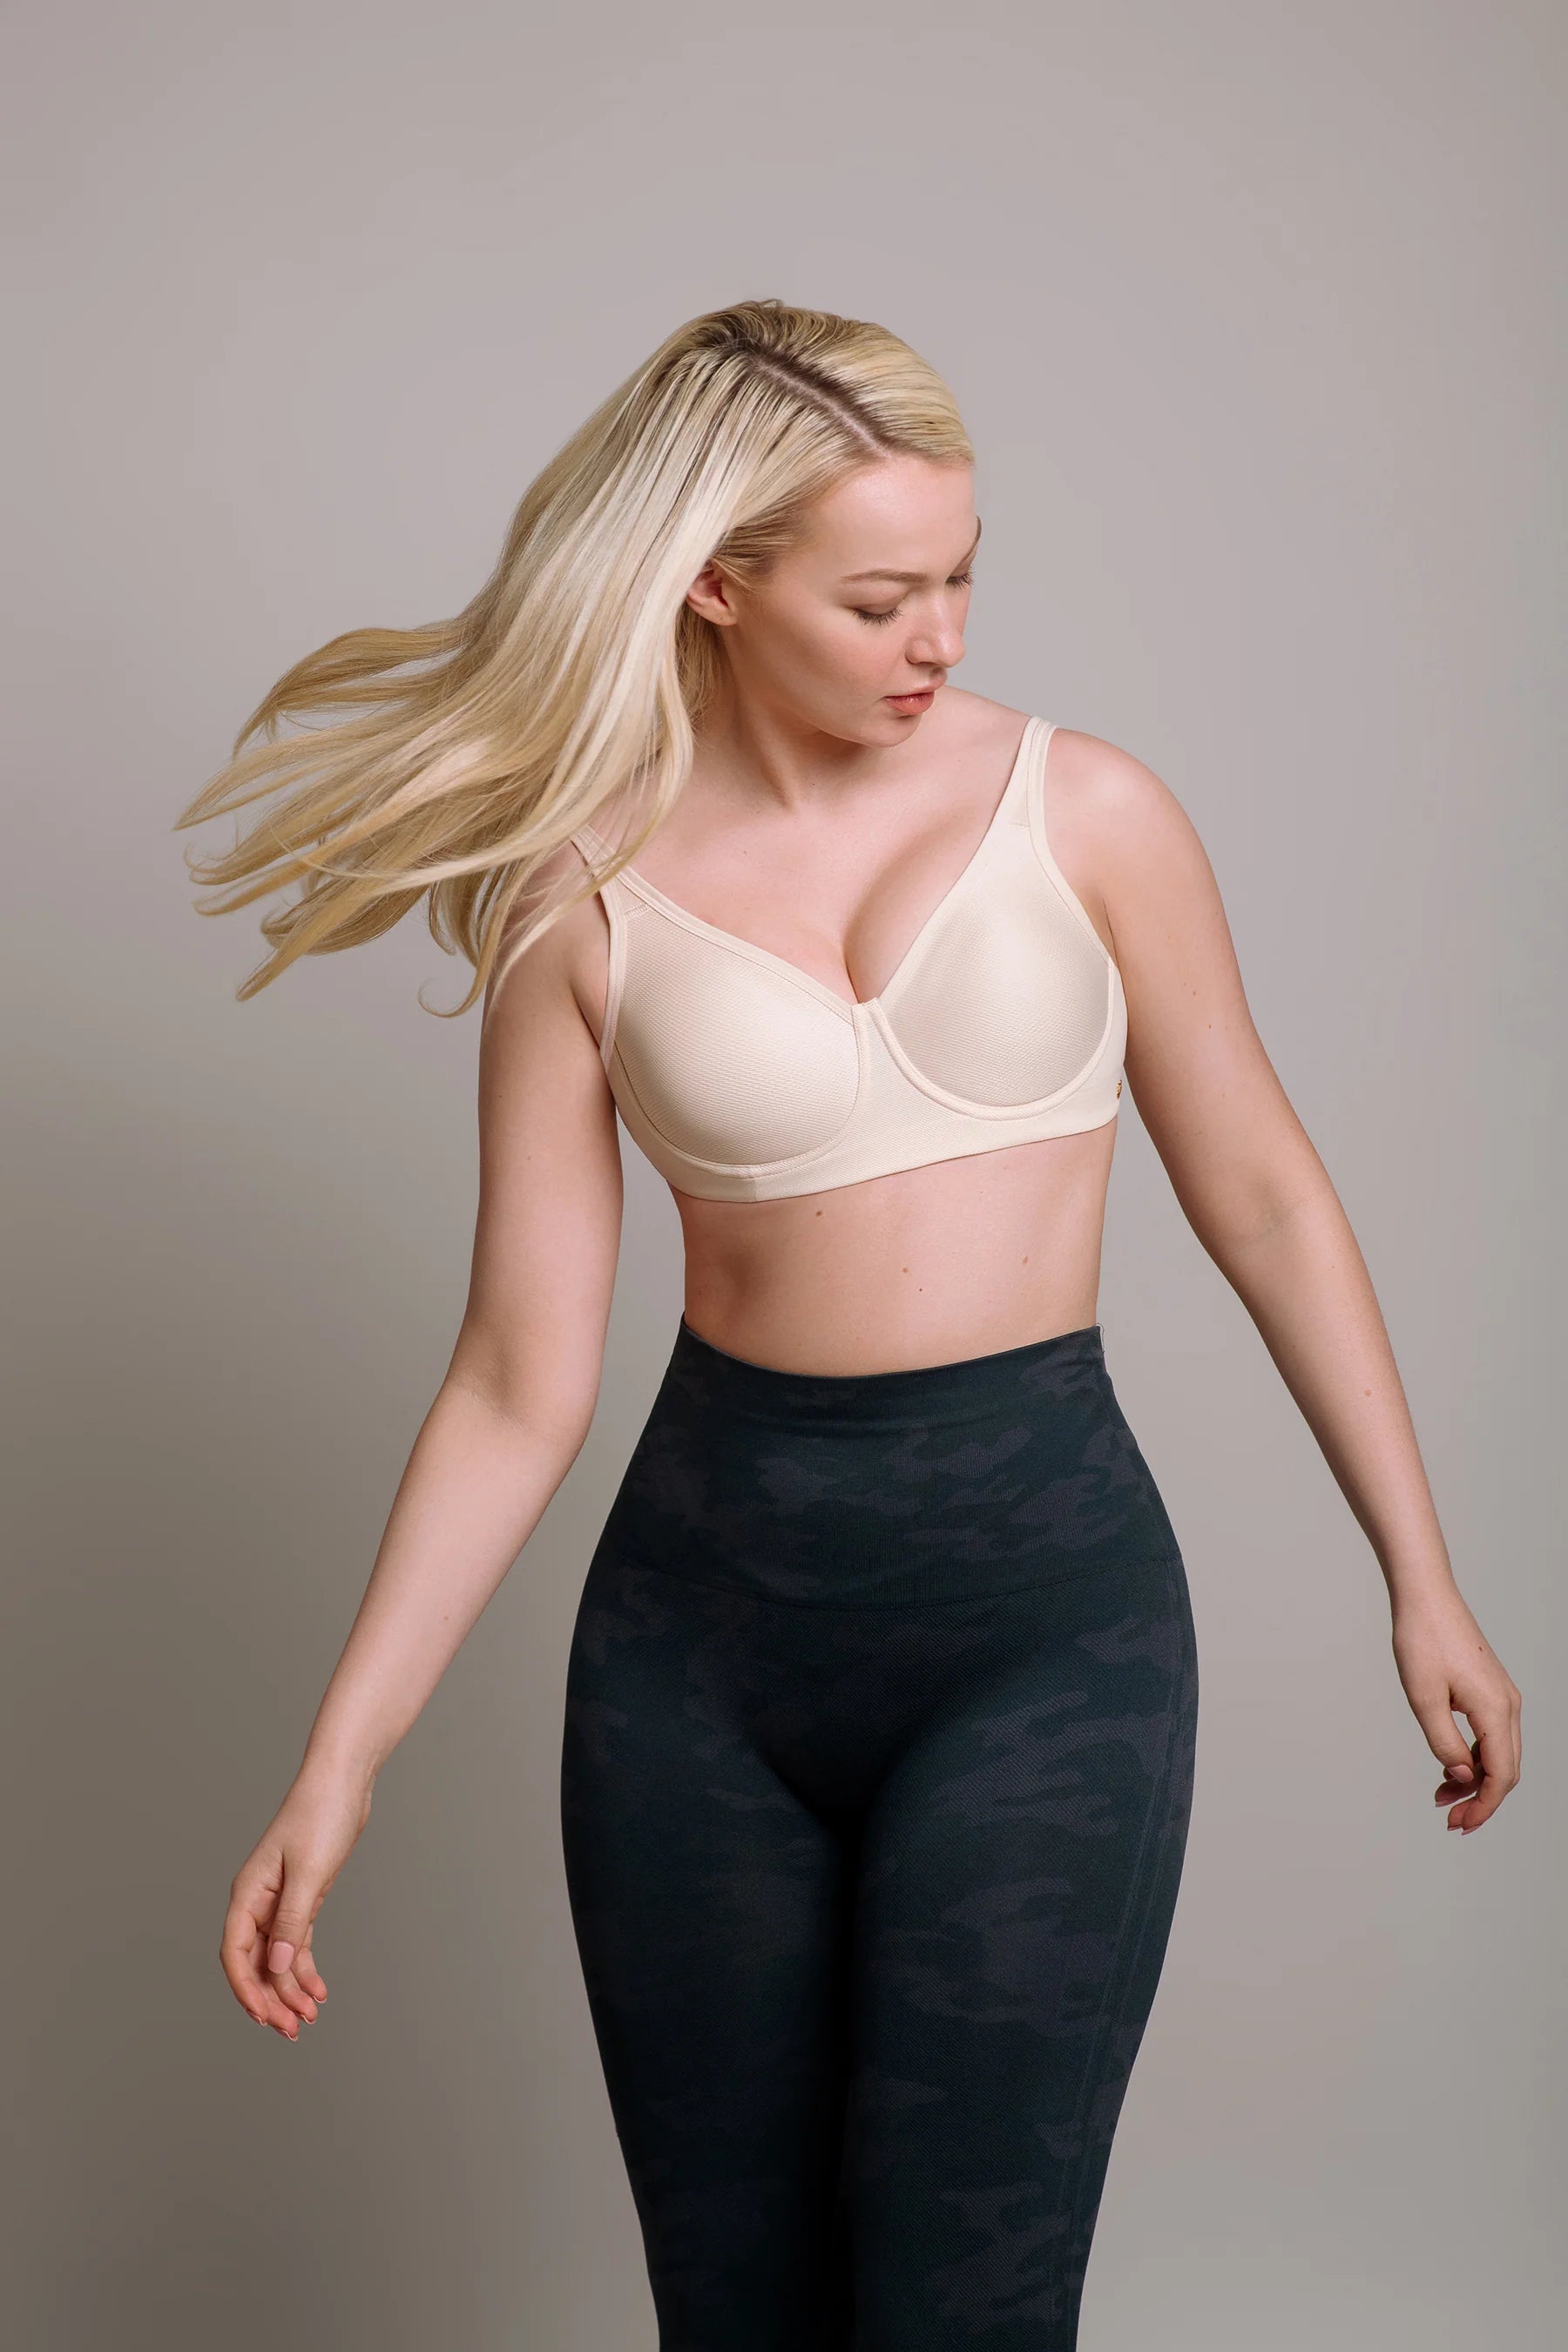 Buy Kica Low to Mid Impact Cotton Sports Bra For Low to Mid Activities  online